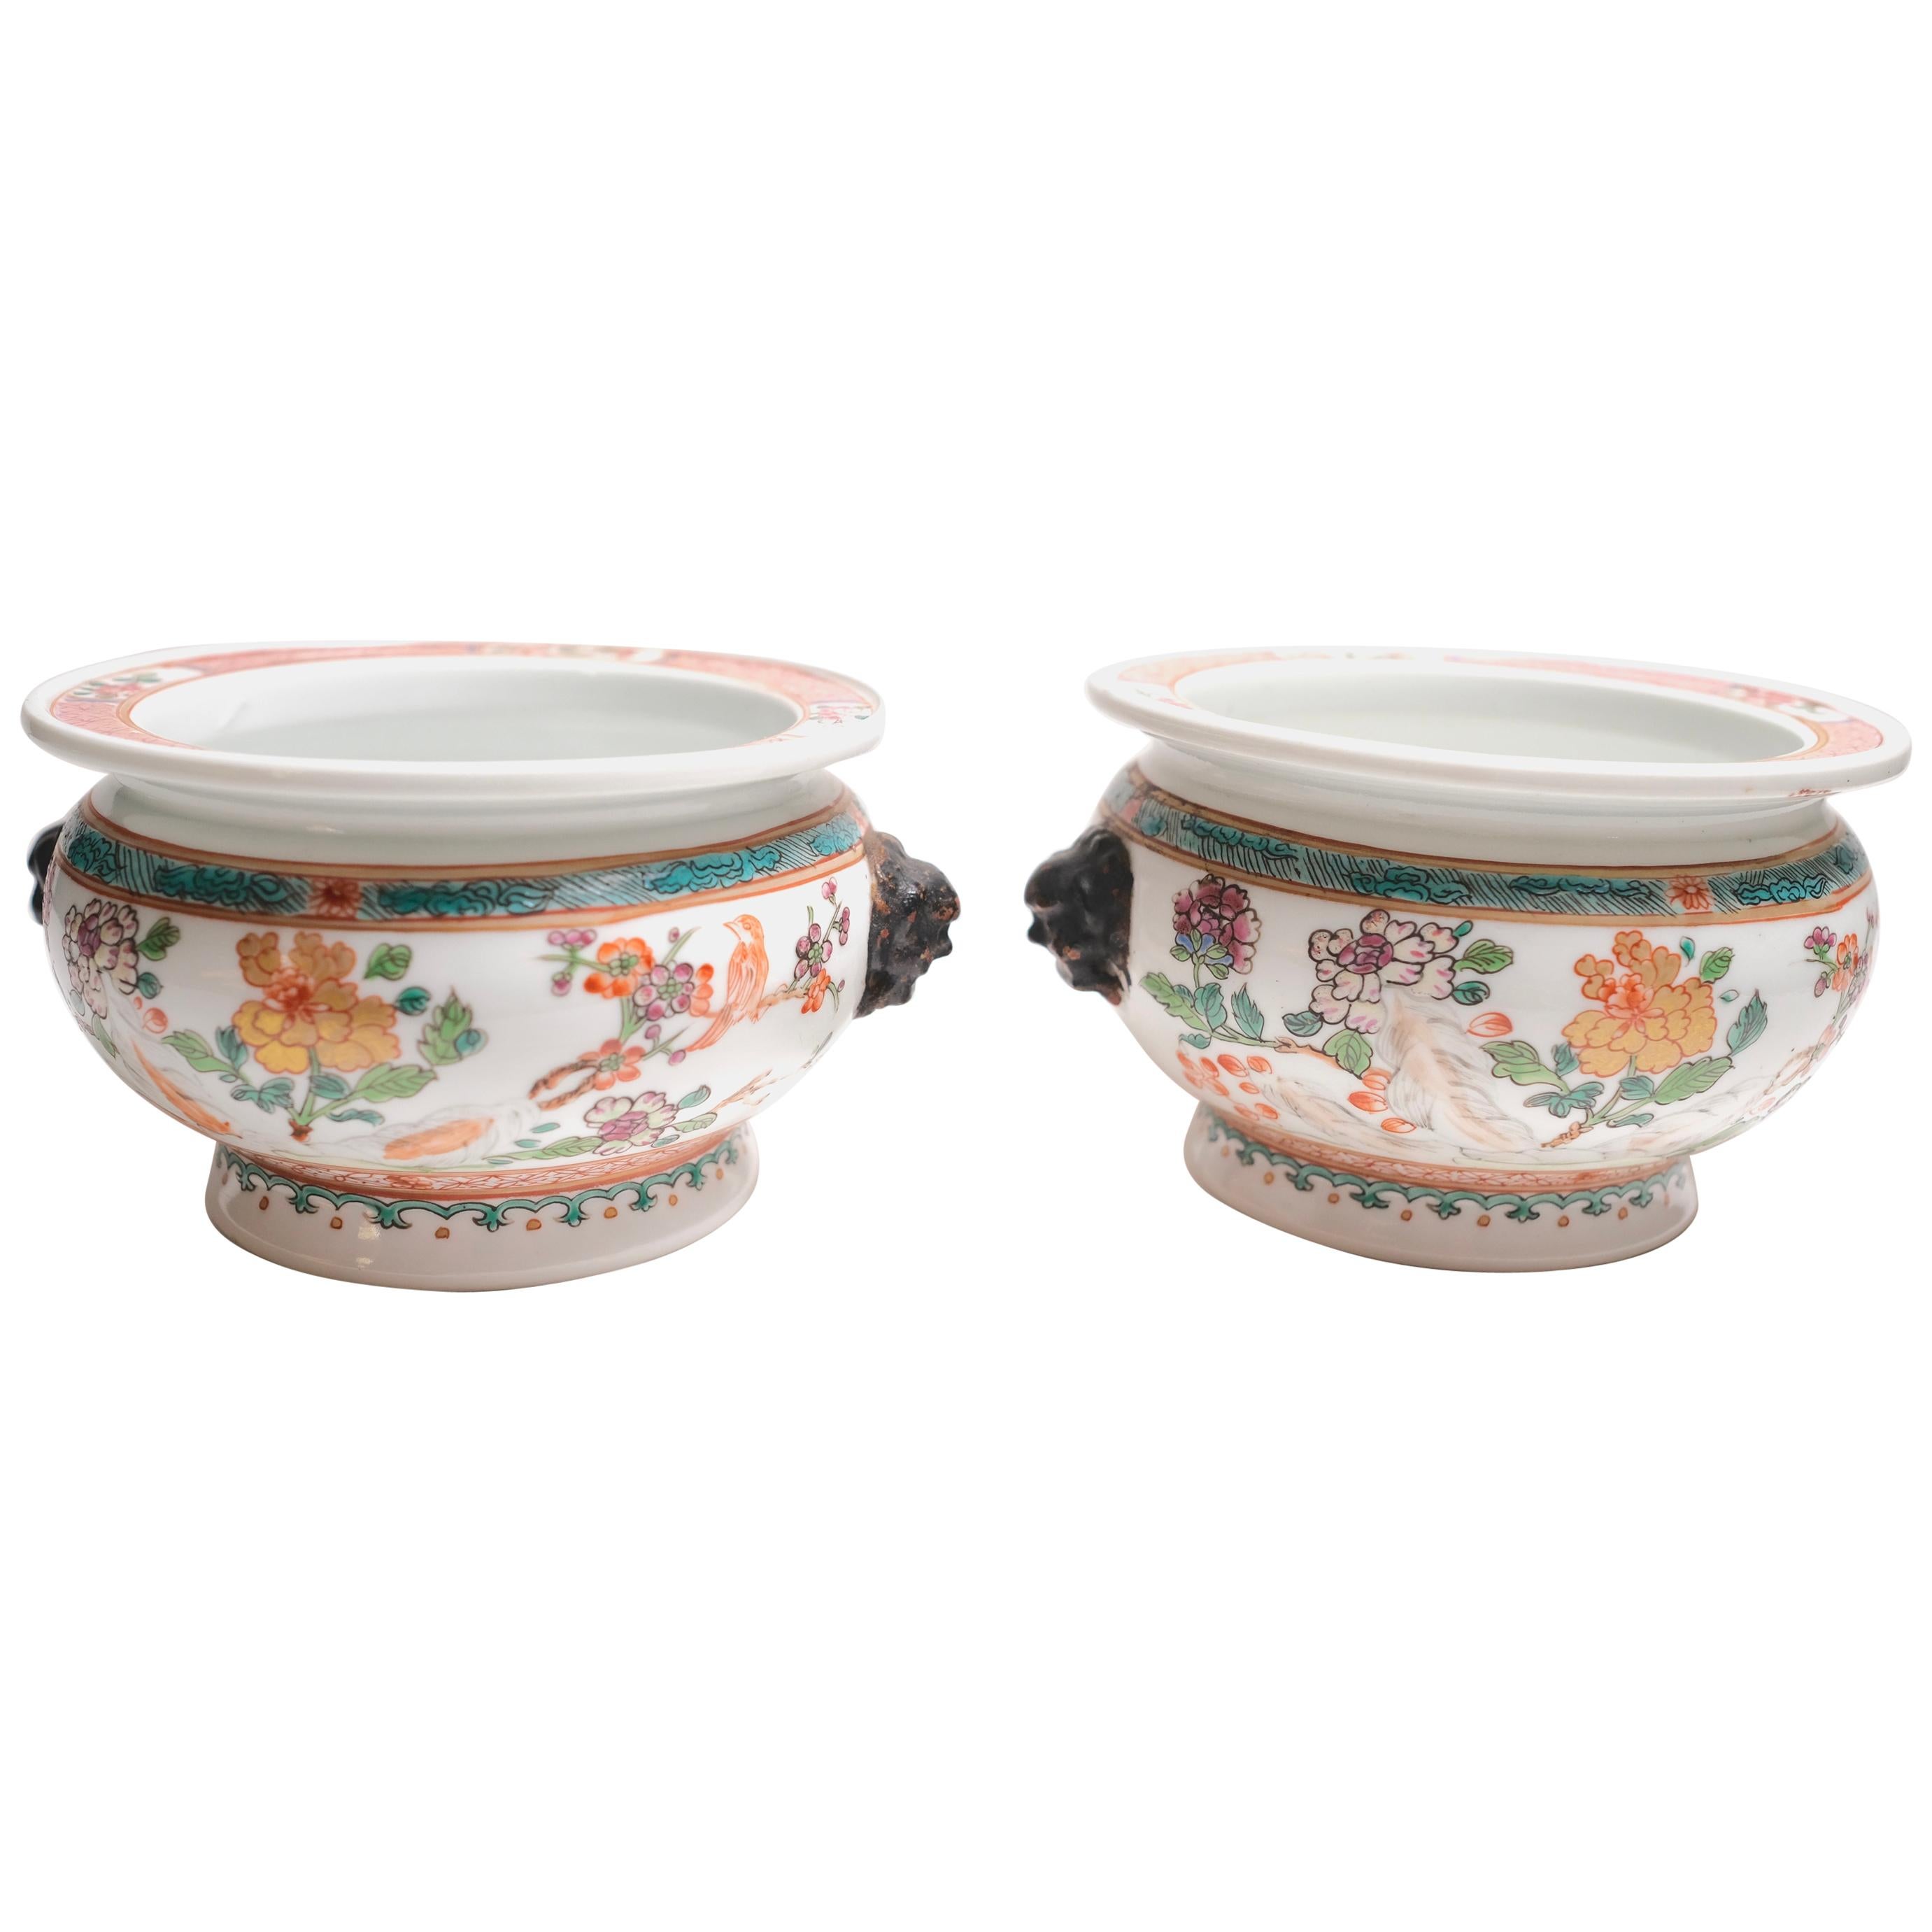 Pair of 19th Century Chinese Export Petite Bowls